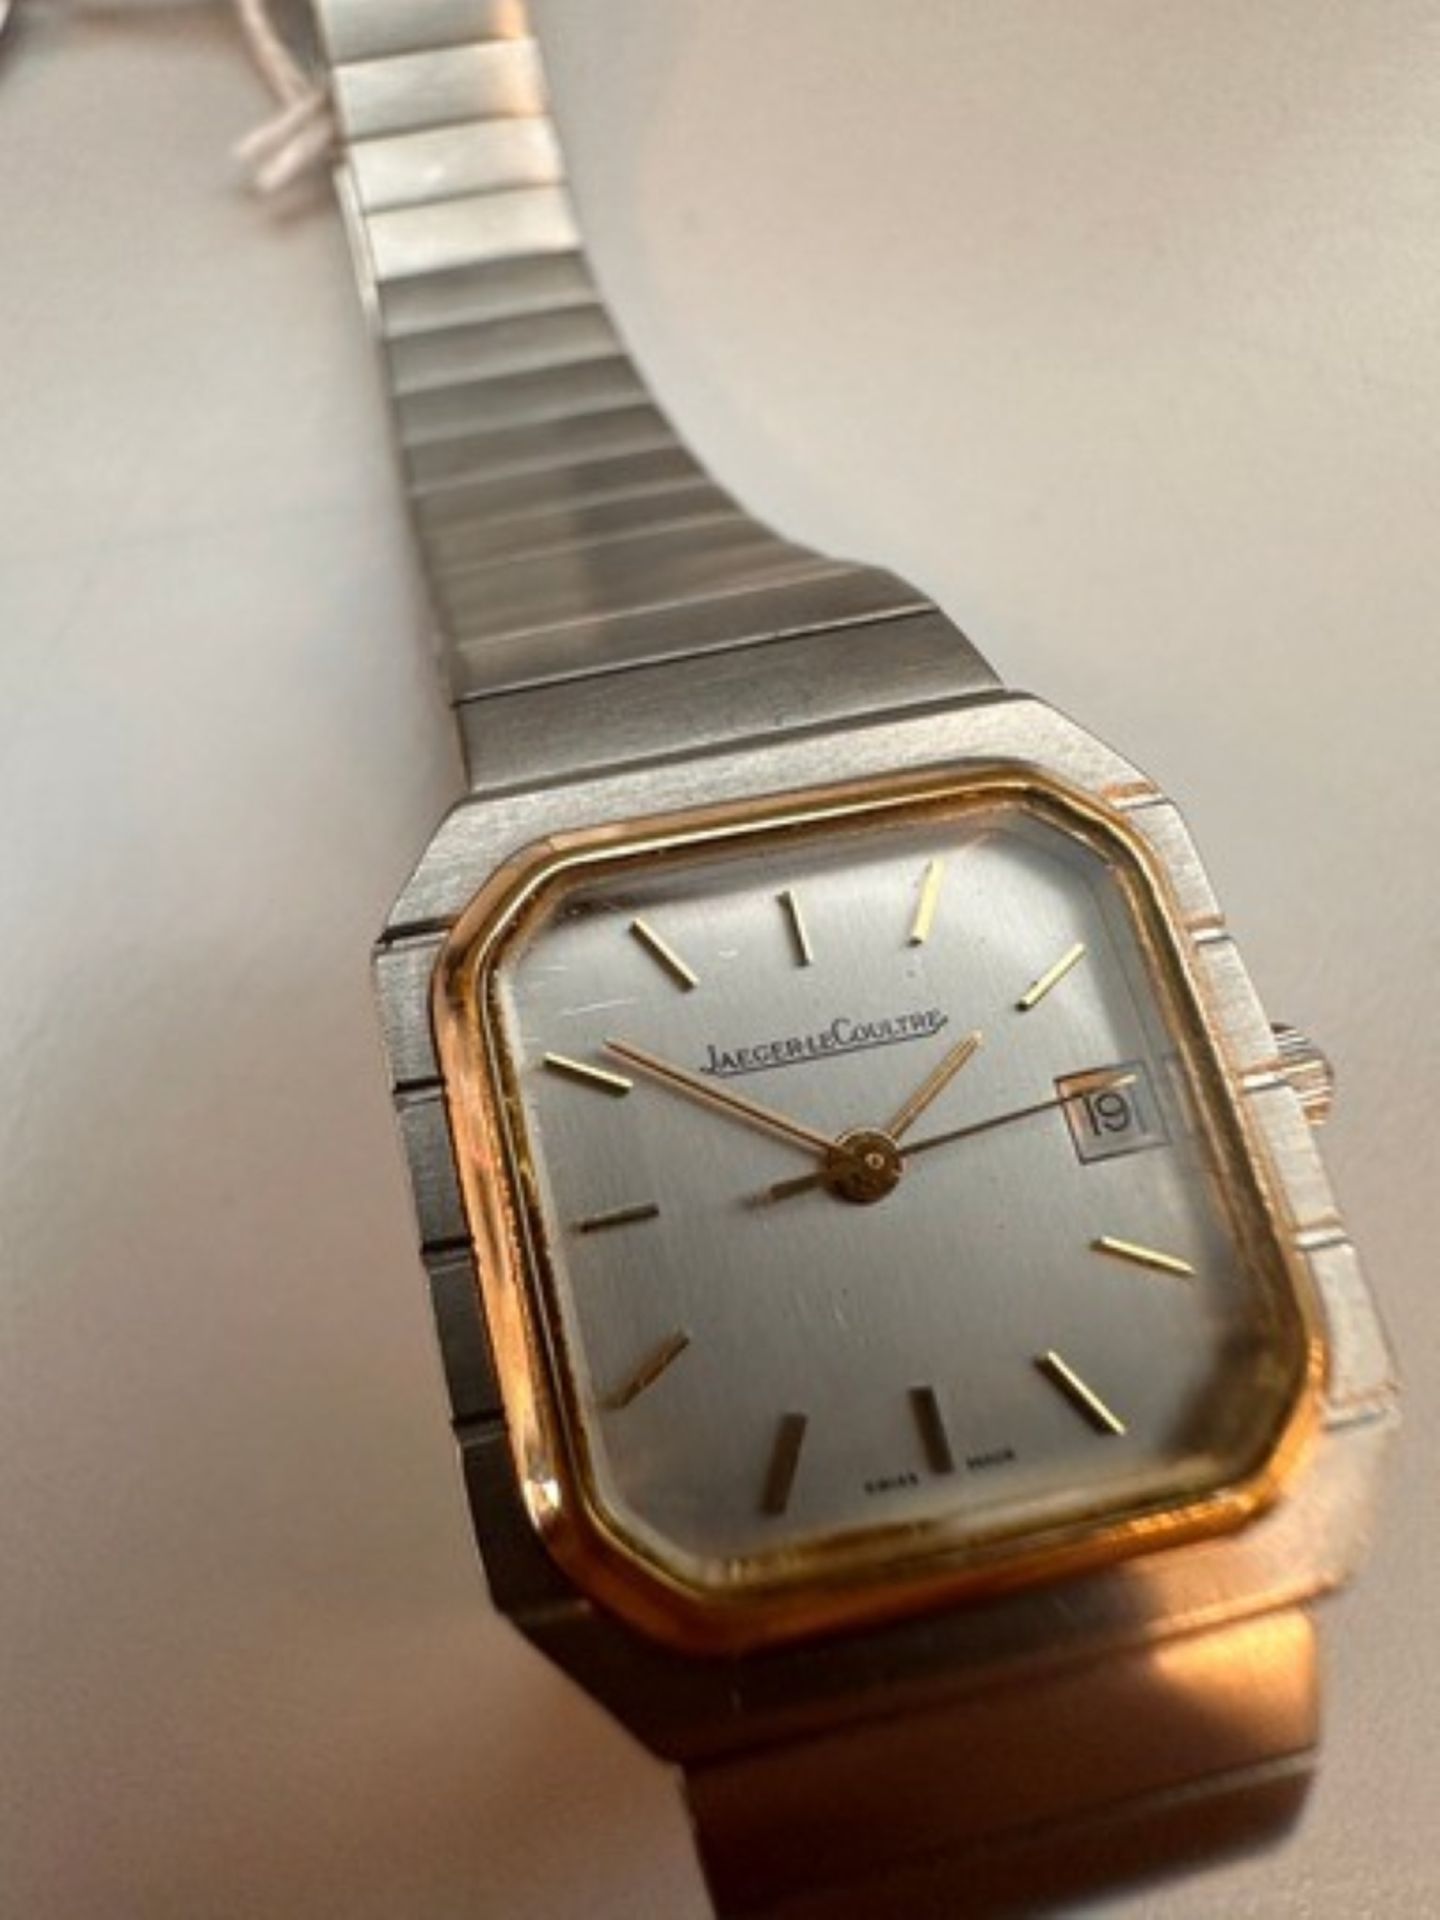 No Reserve - Jaeger-LeCoultre - Lady's watch. - Image 6 of 6